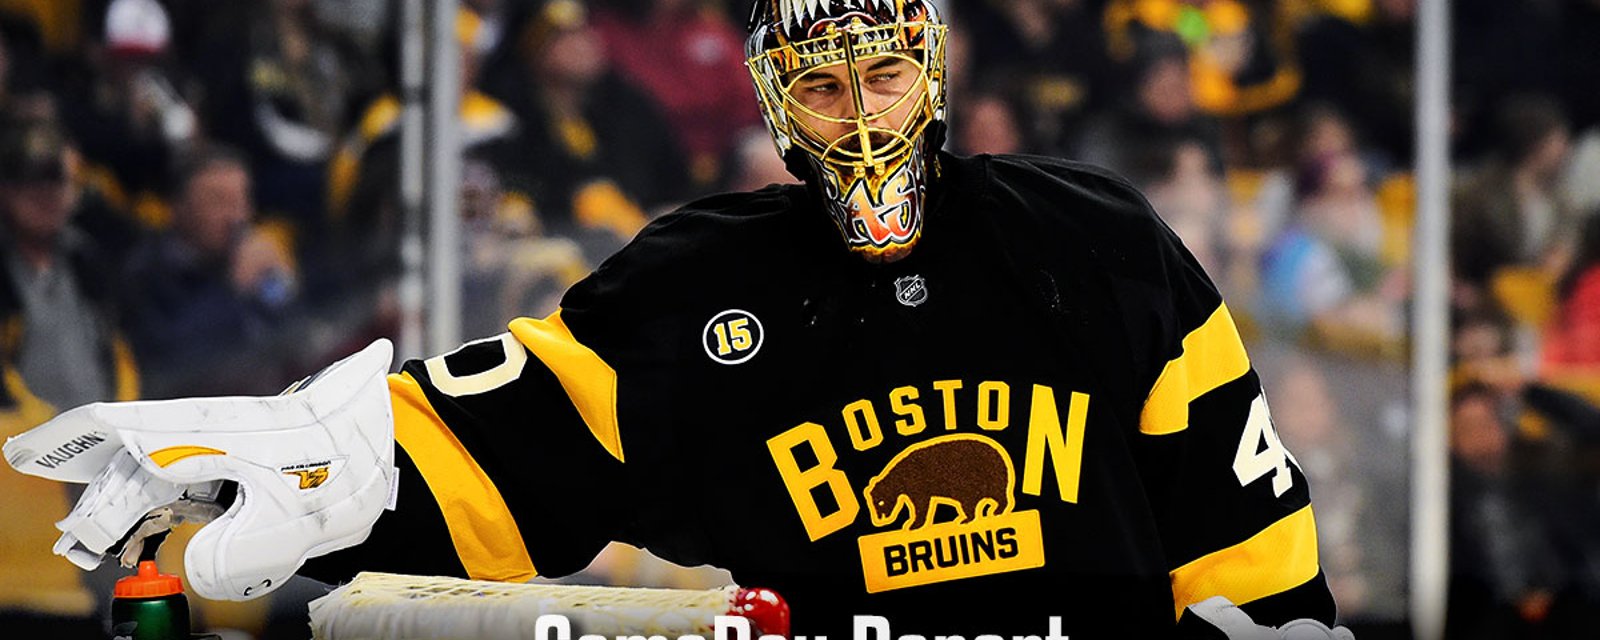 Report: Why Tuukka Rask was pulled in the second period.